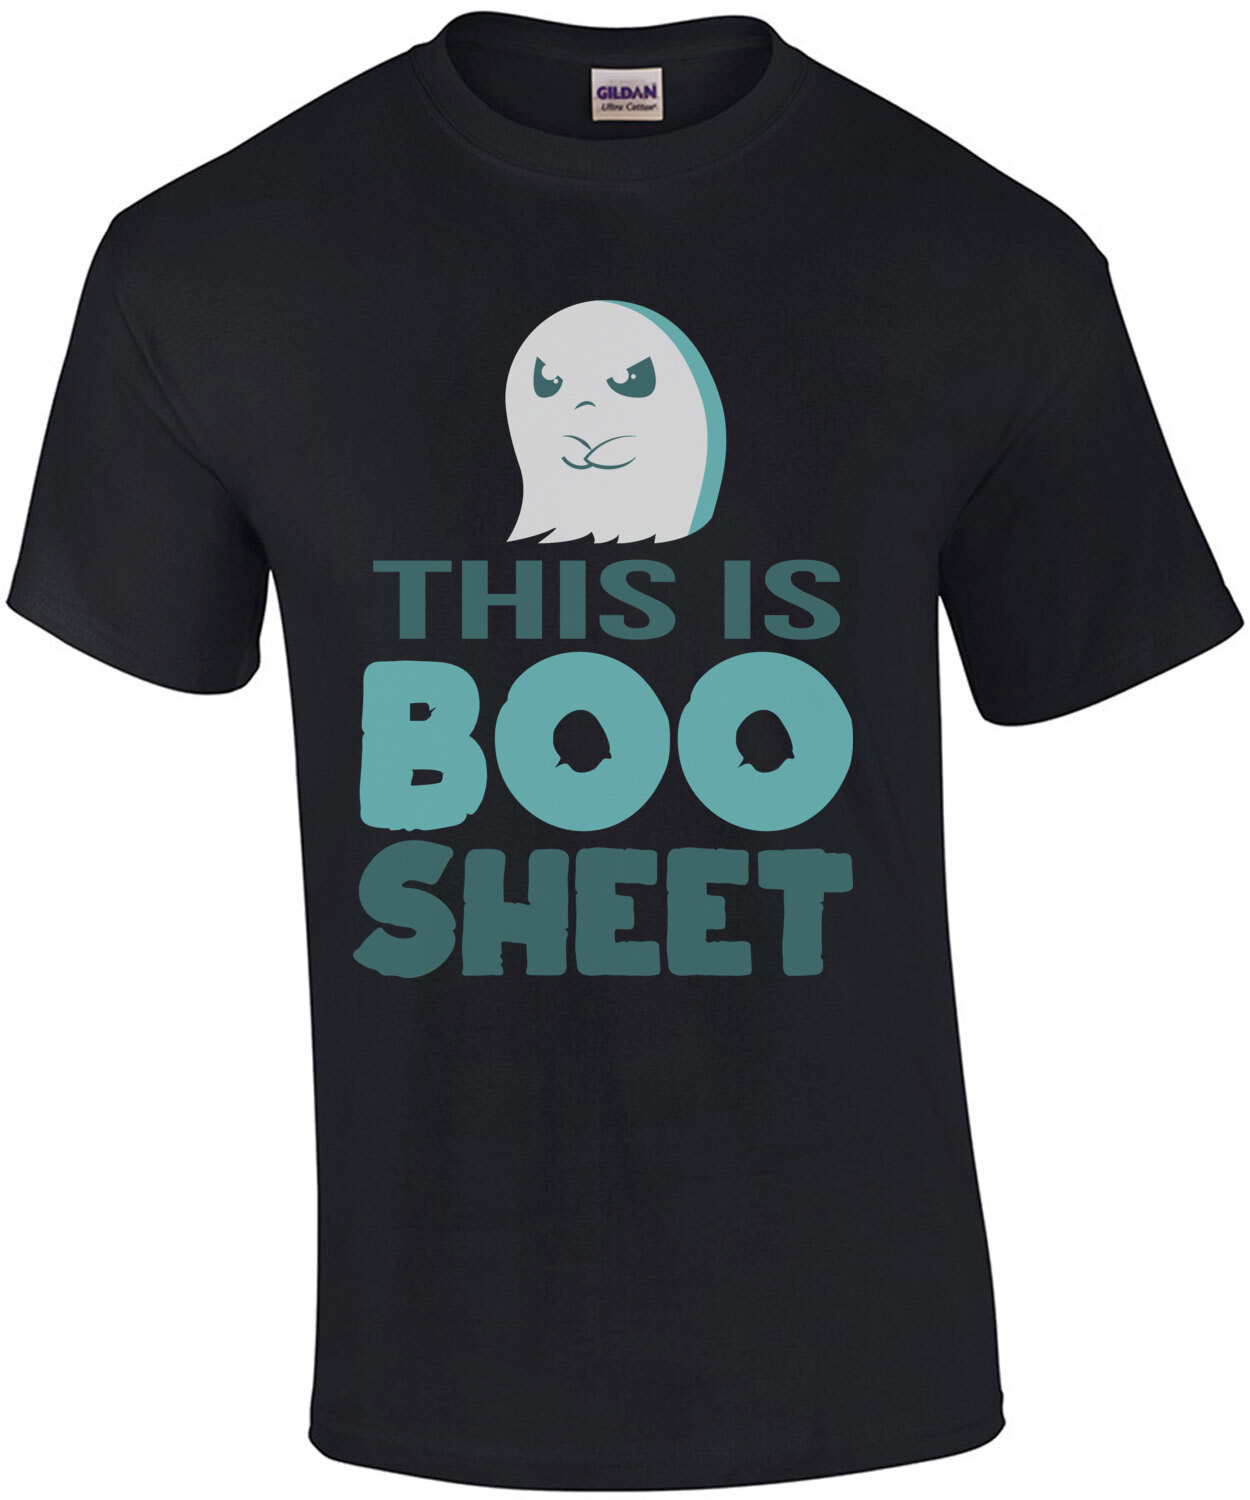 This is Boo Sheet - Funny Halloween T-Shirt